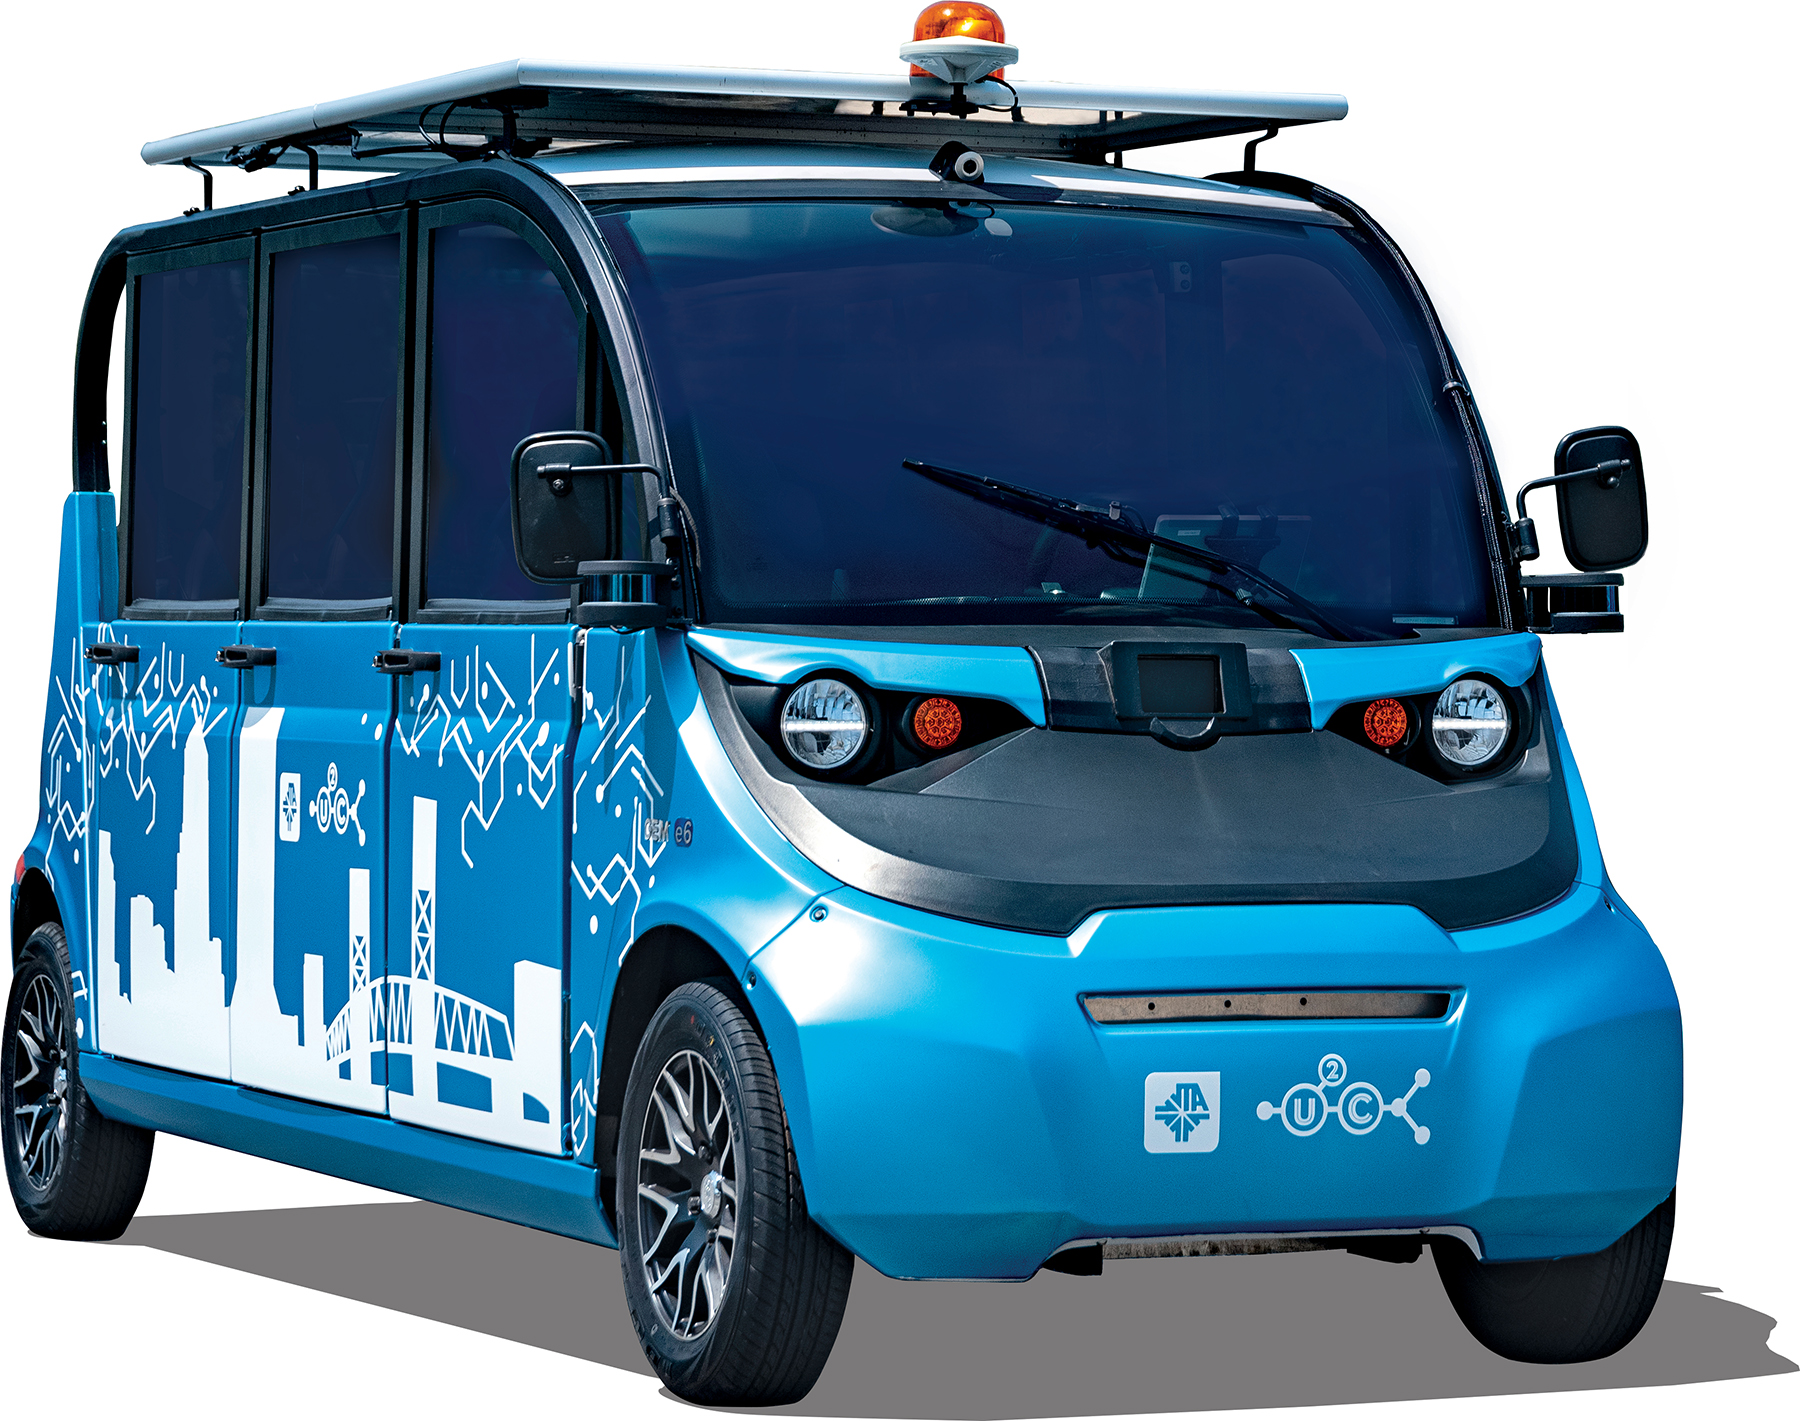 The six-seater, solar-powered GEM Polaris is one of eight vehicles from five different platforms that the JTA has tested. Other options have included vehicles from Navya and Local Motors, the latter of which shut down. (Image courtesy of Jacksonville Transportation Authority)